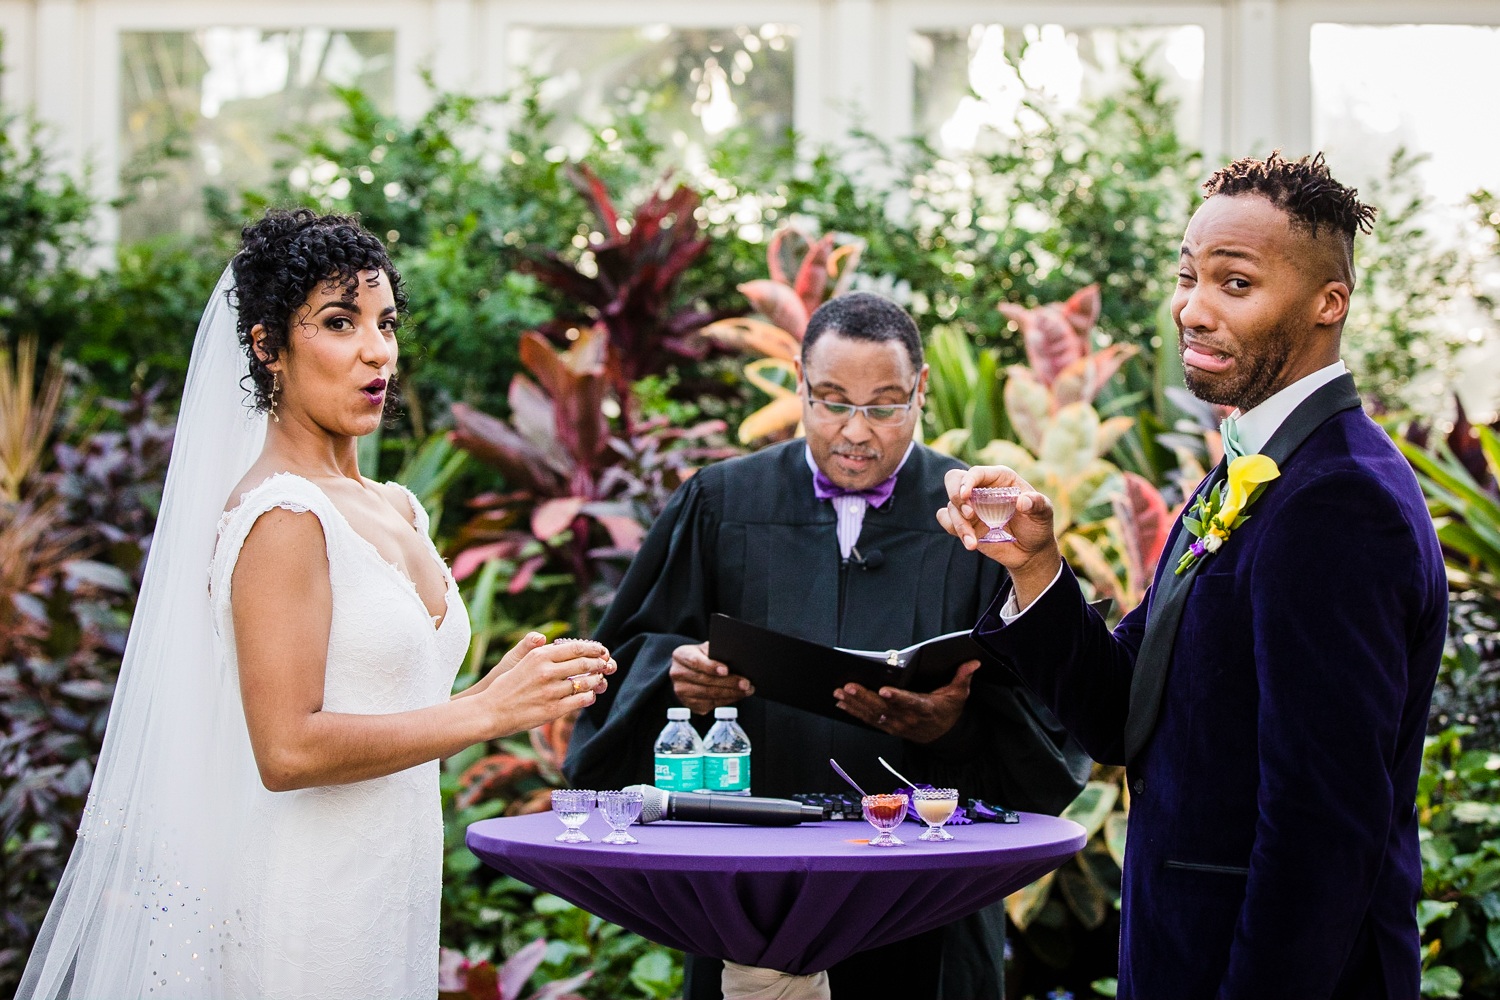 A bride and groom react during a tasting of the elements ceremony at a Garfield Park Conservatory wedding.